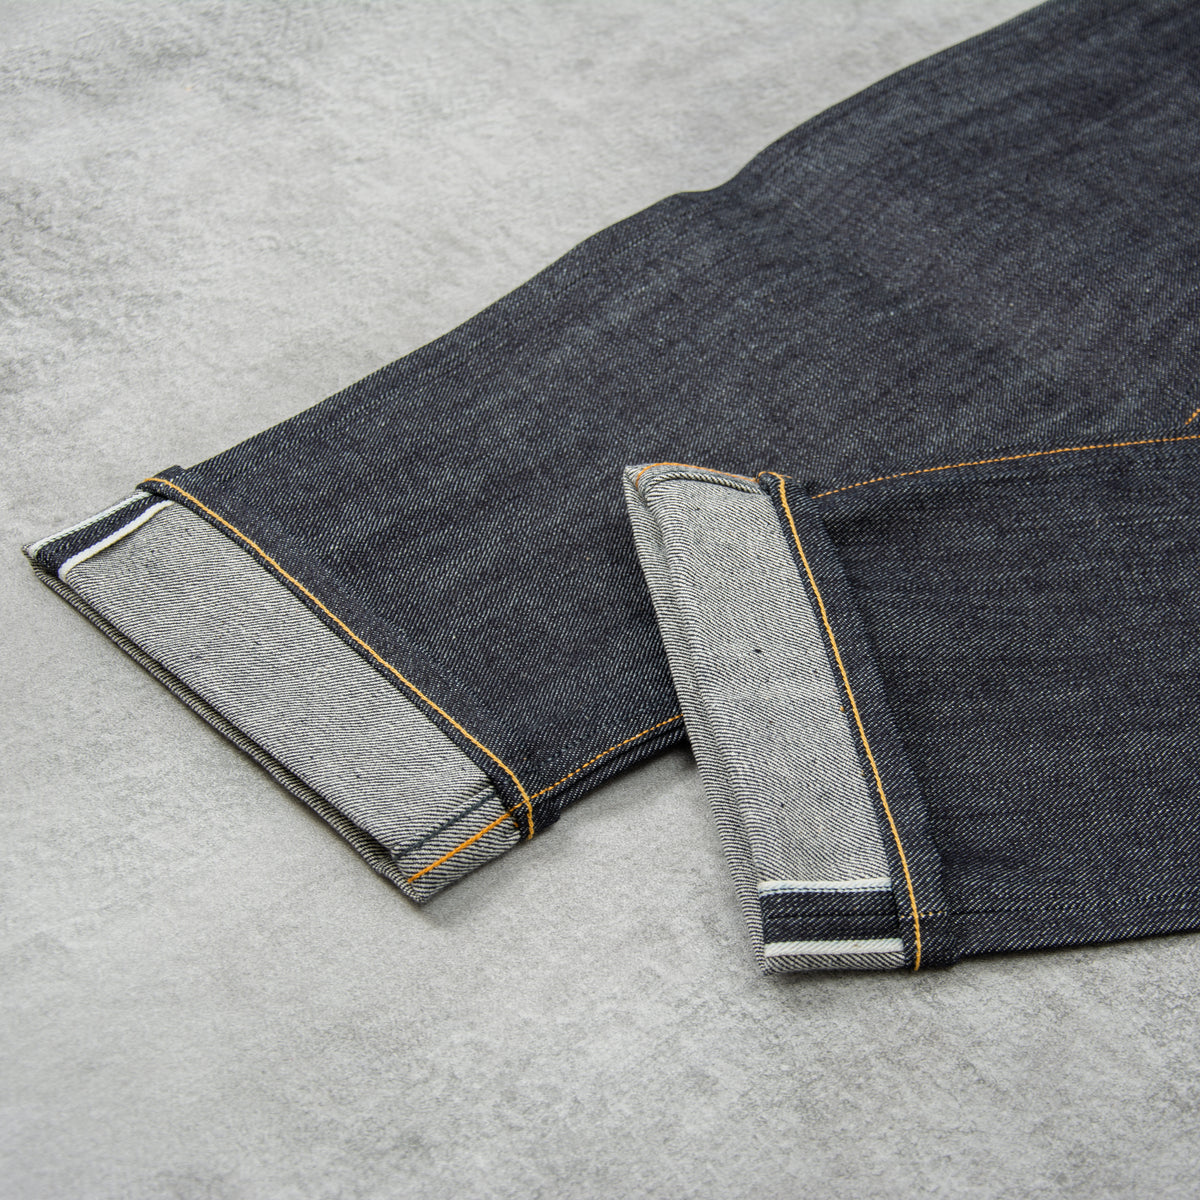 Buy the Lee 101 Z KA Jeans - Dry Blue Selvage @Union Clothing